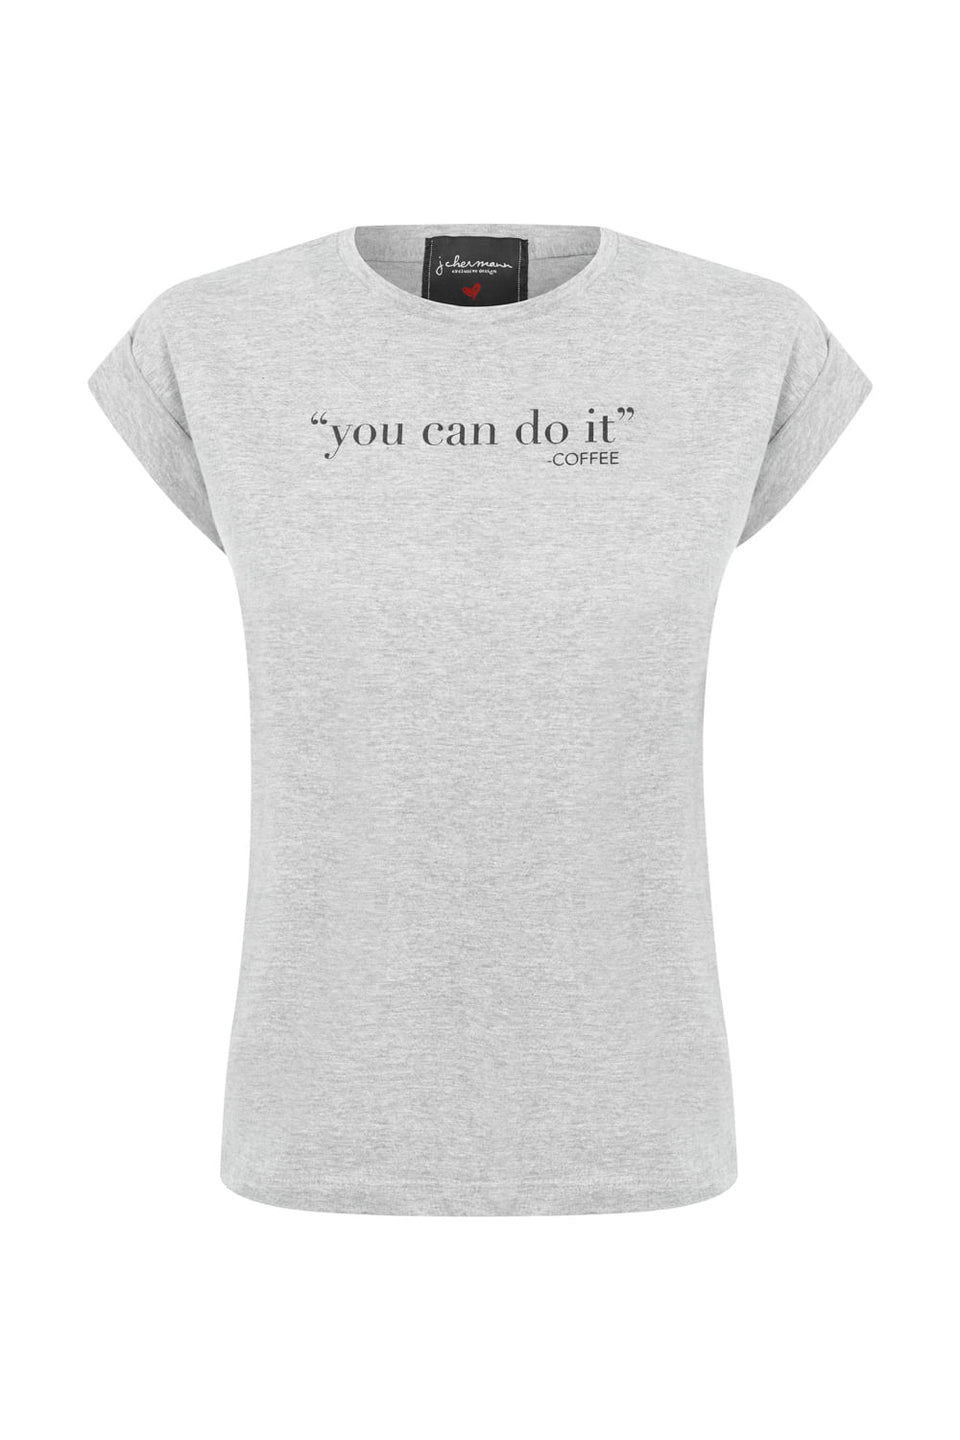 Camiseta you can do it Cinza